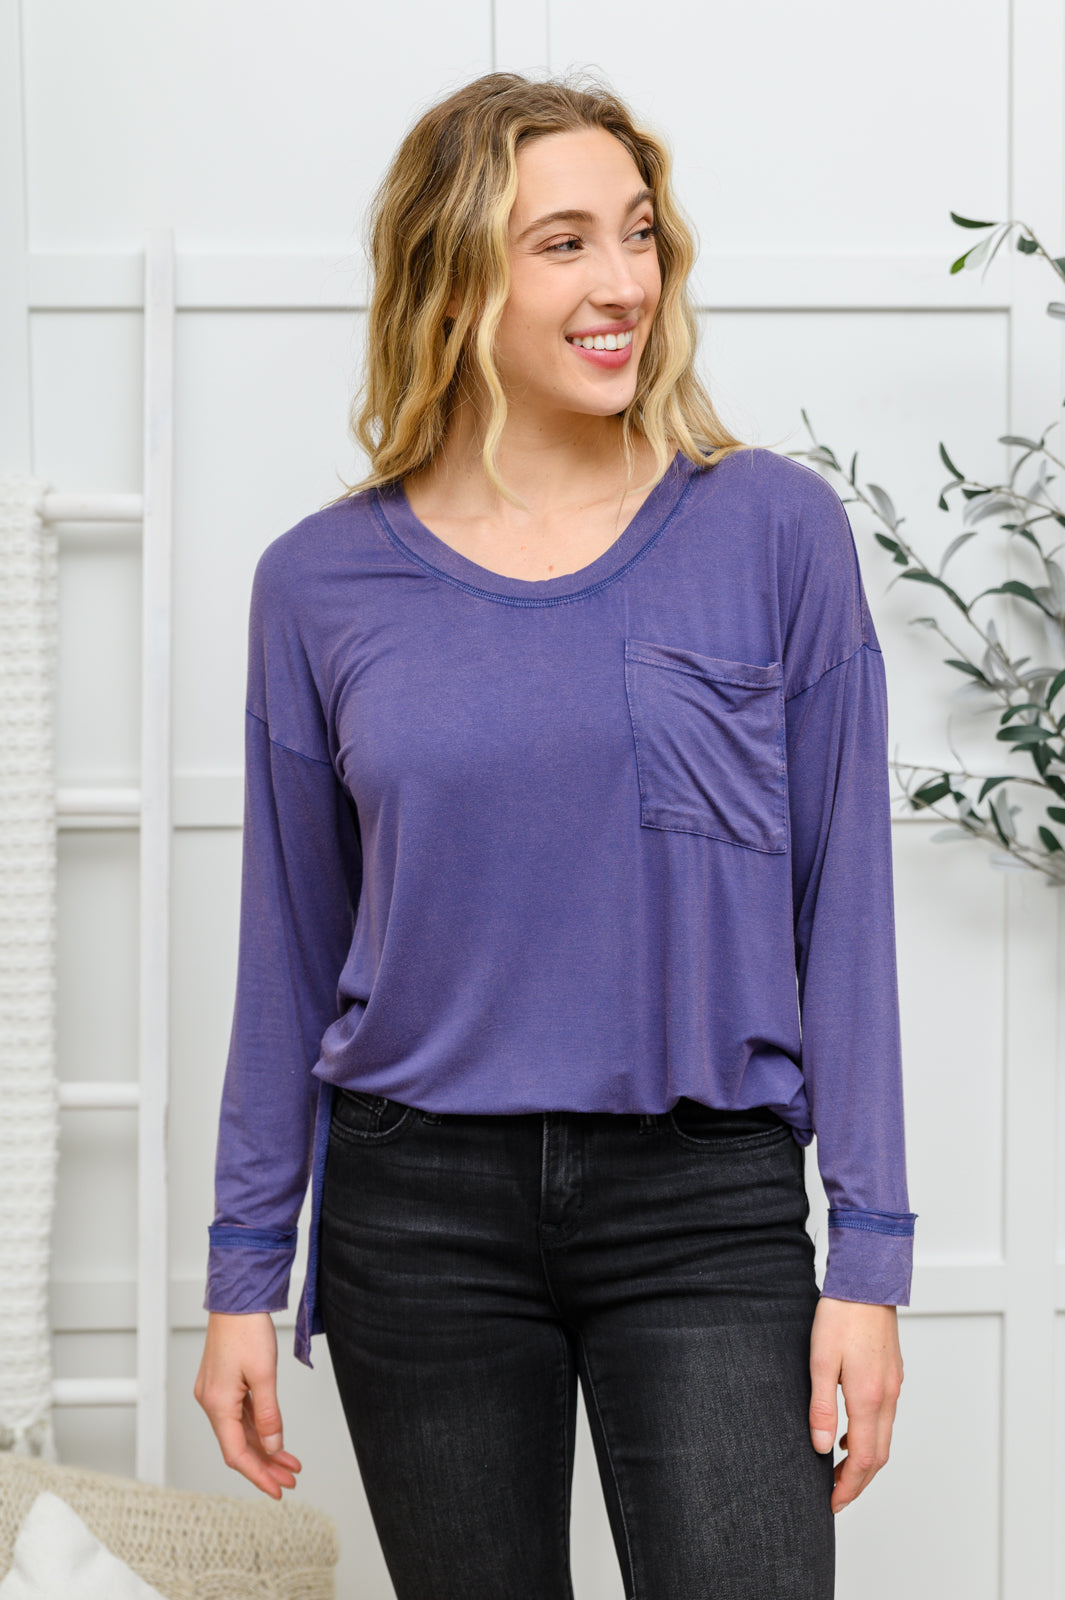 The Long Sleeve Knit Top With Pocket In Denim Blue features a lightweight, stretchy fabric that shapes a round neckline with long sleeves, and a hi-low hem with side slit